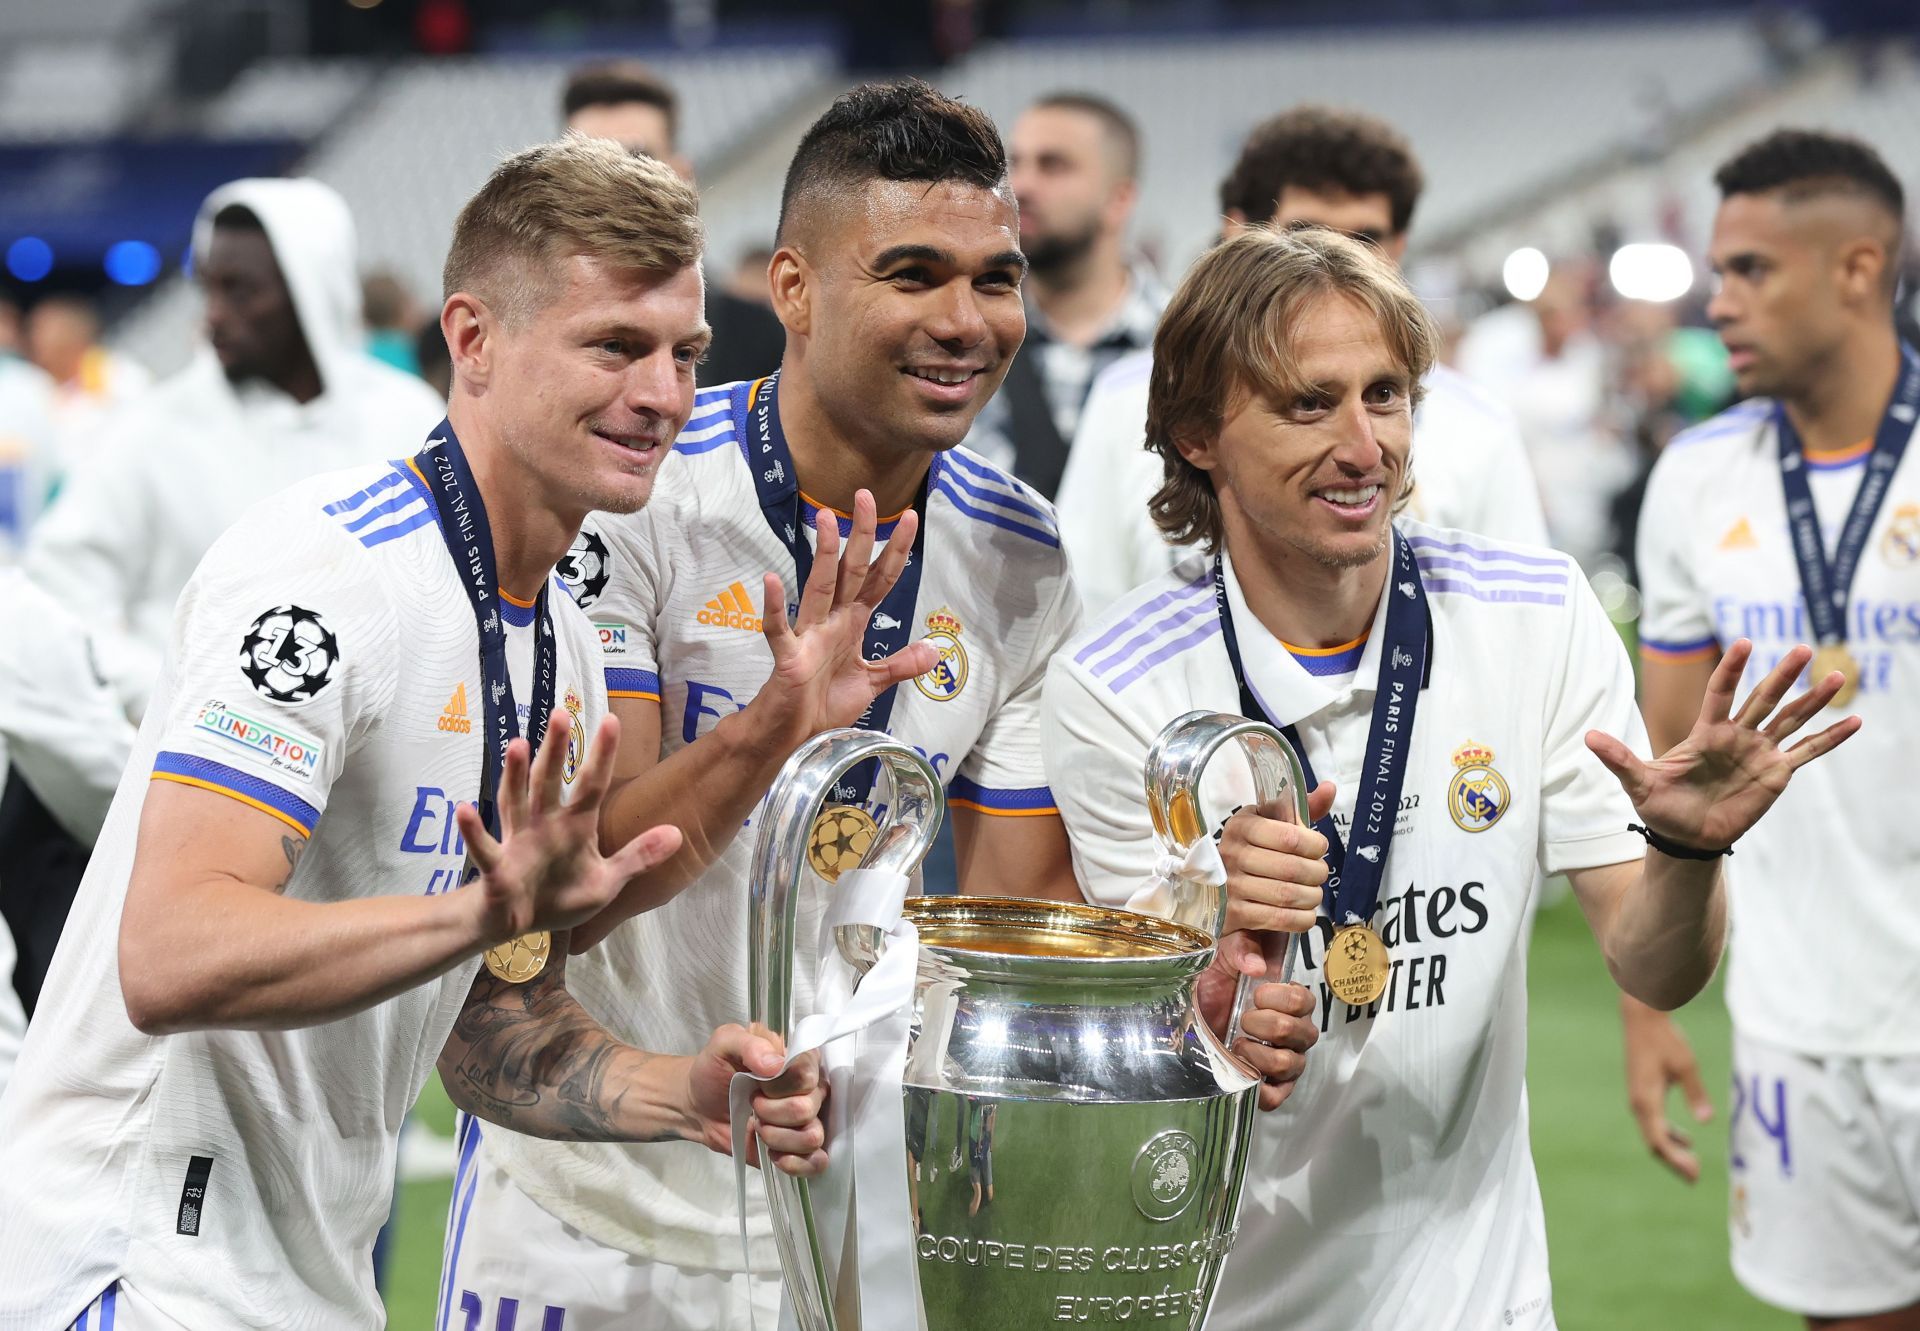 Toni Kroos (left) would rather win team trophies with Real Madrid.